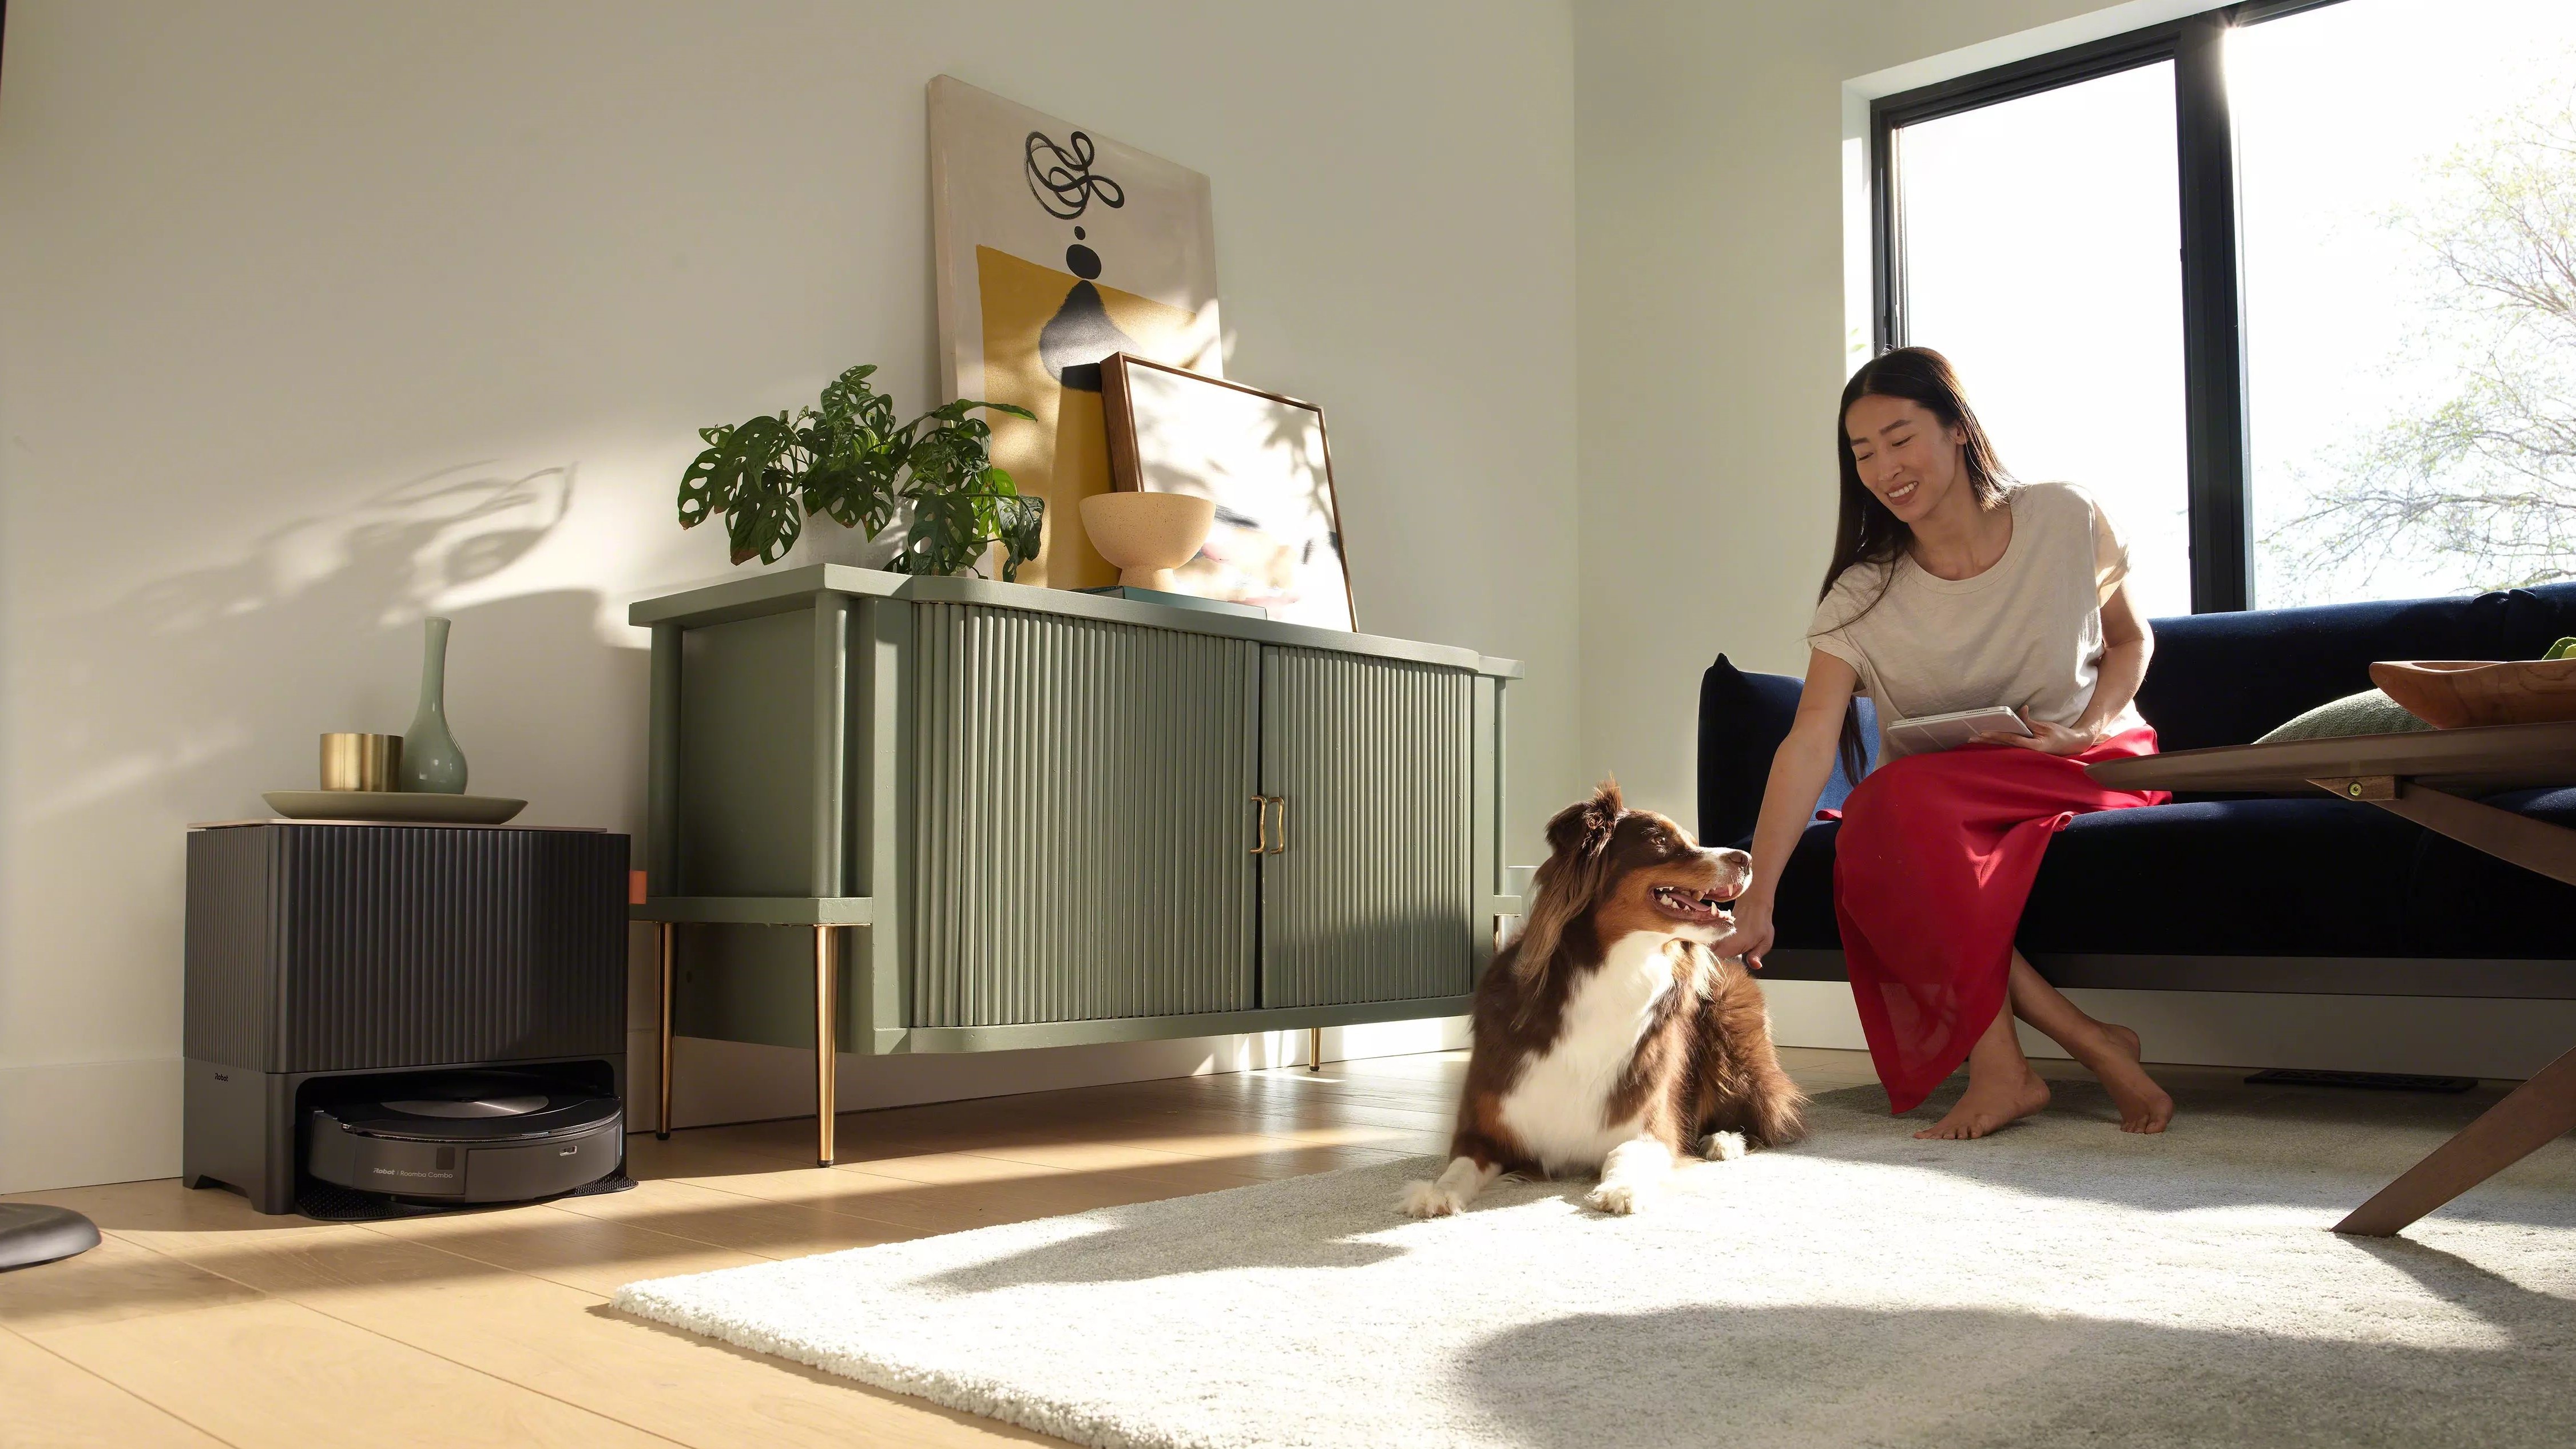 The Roomba Combo j9+ sits in its dock in a person's living room while a person pets their dog on the couch